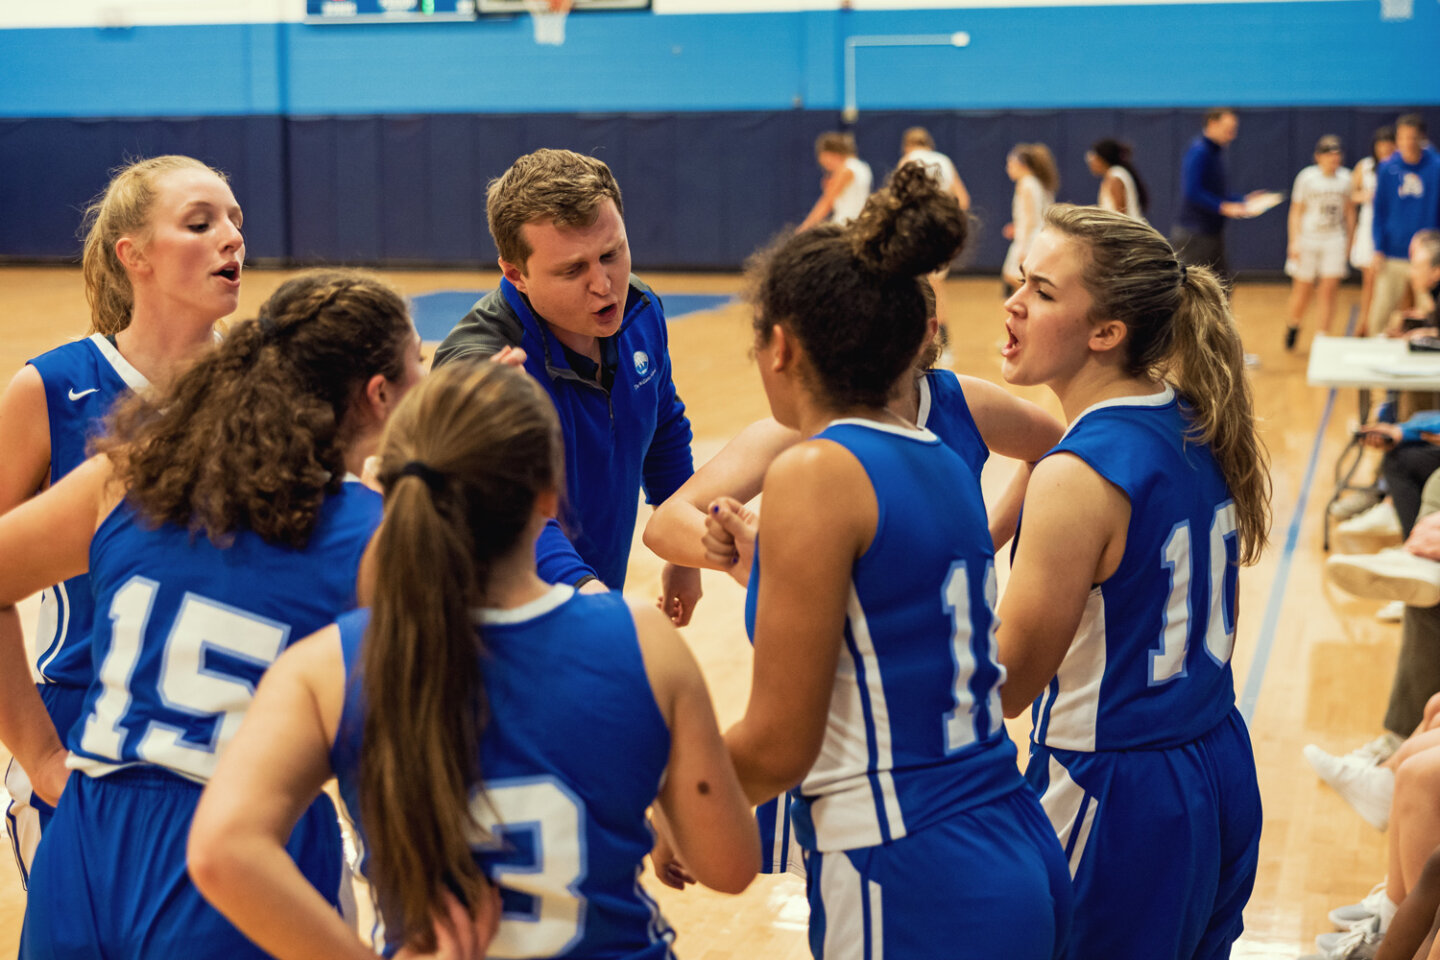 Girls basketball team huddles with coach during game